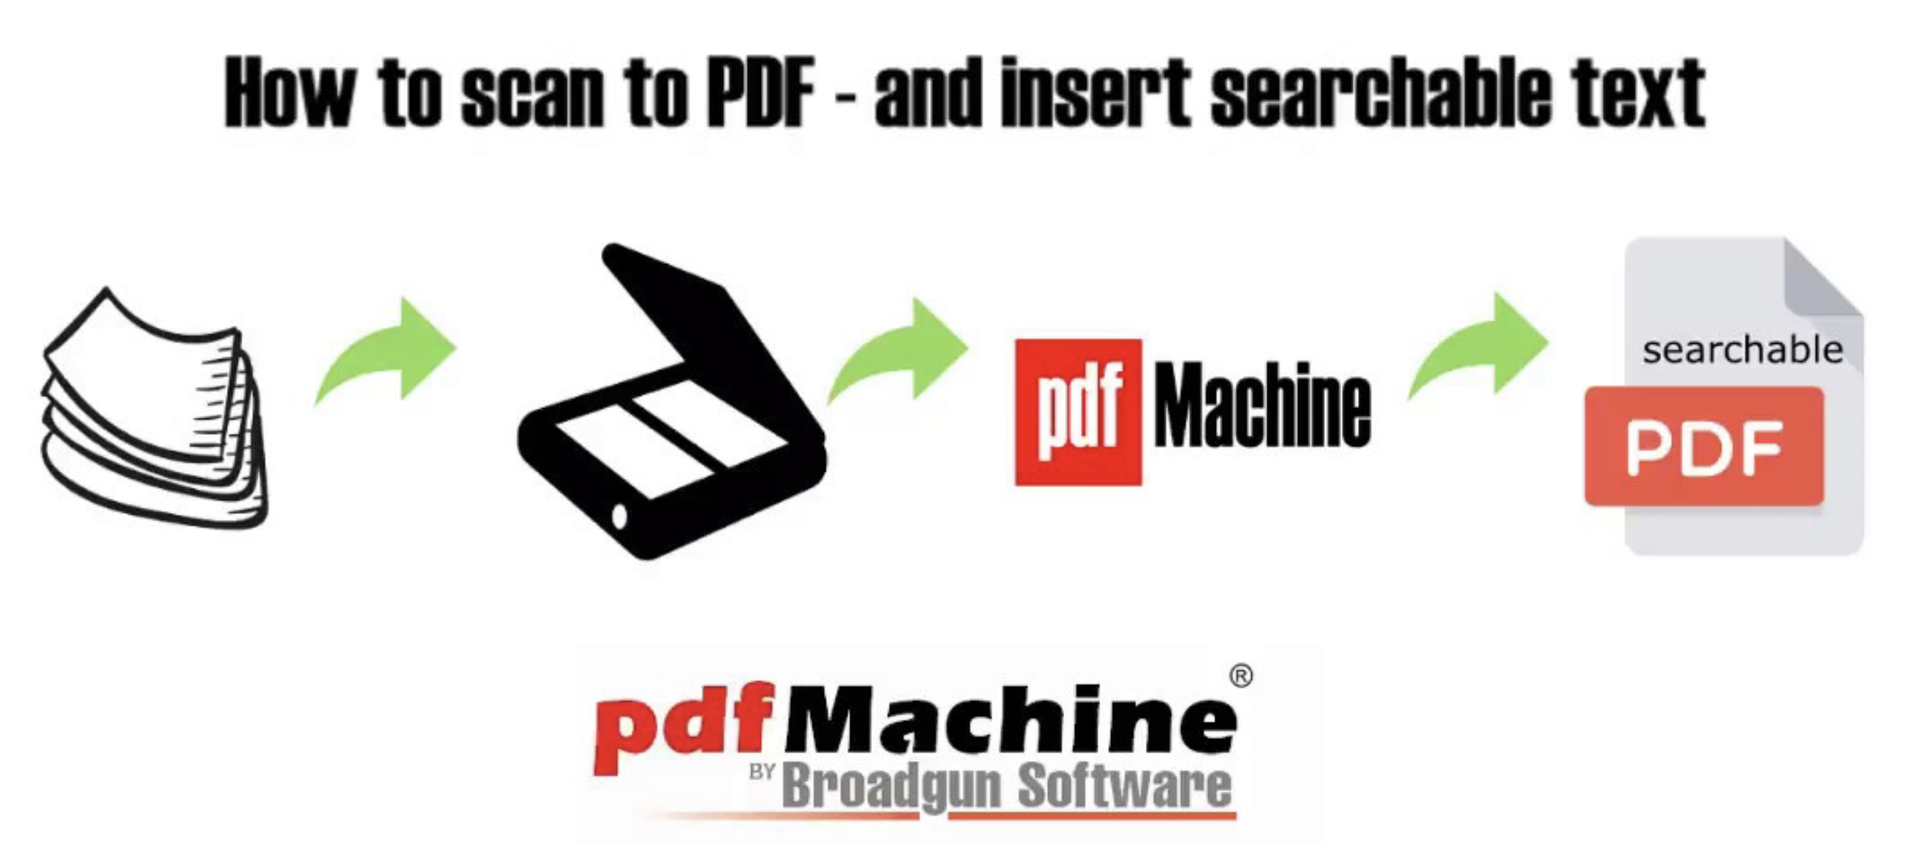 What’s new in Broadgun pdfMachine?